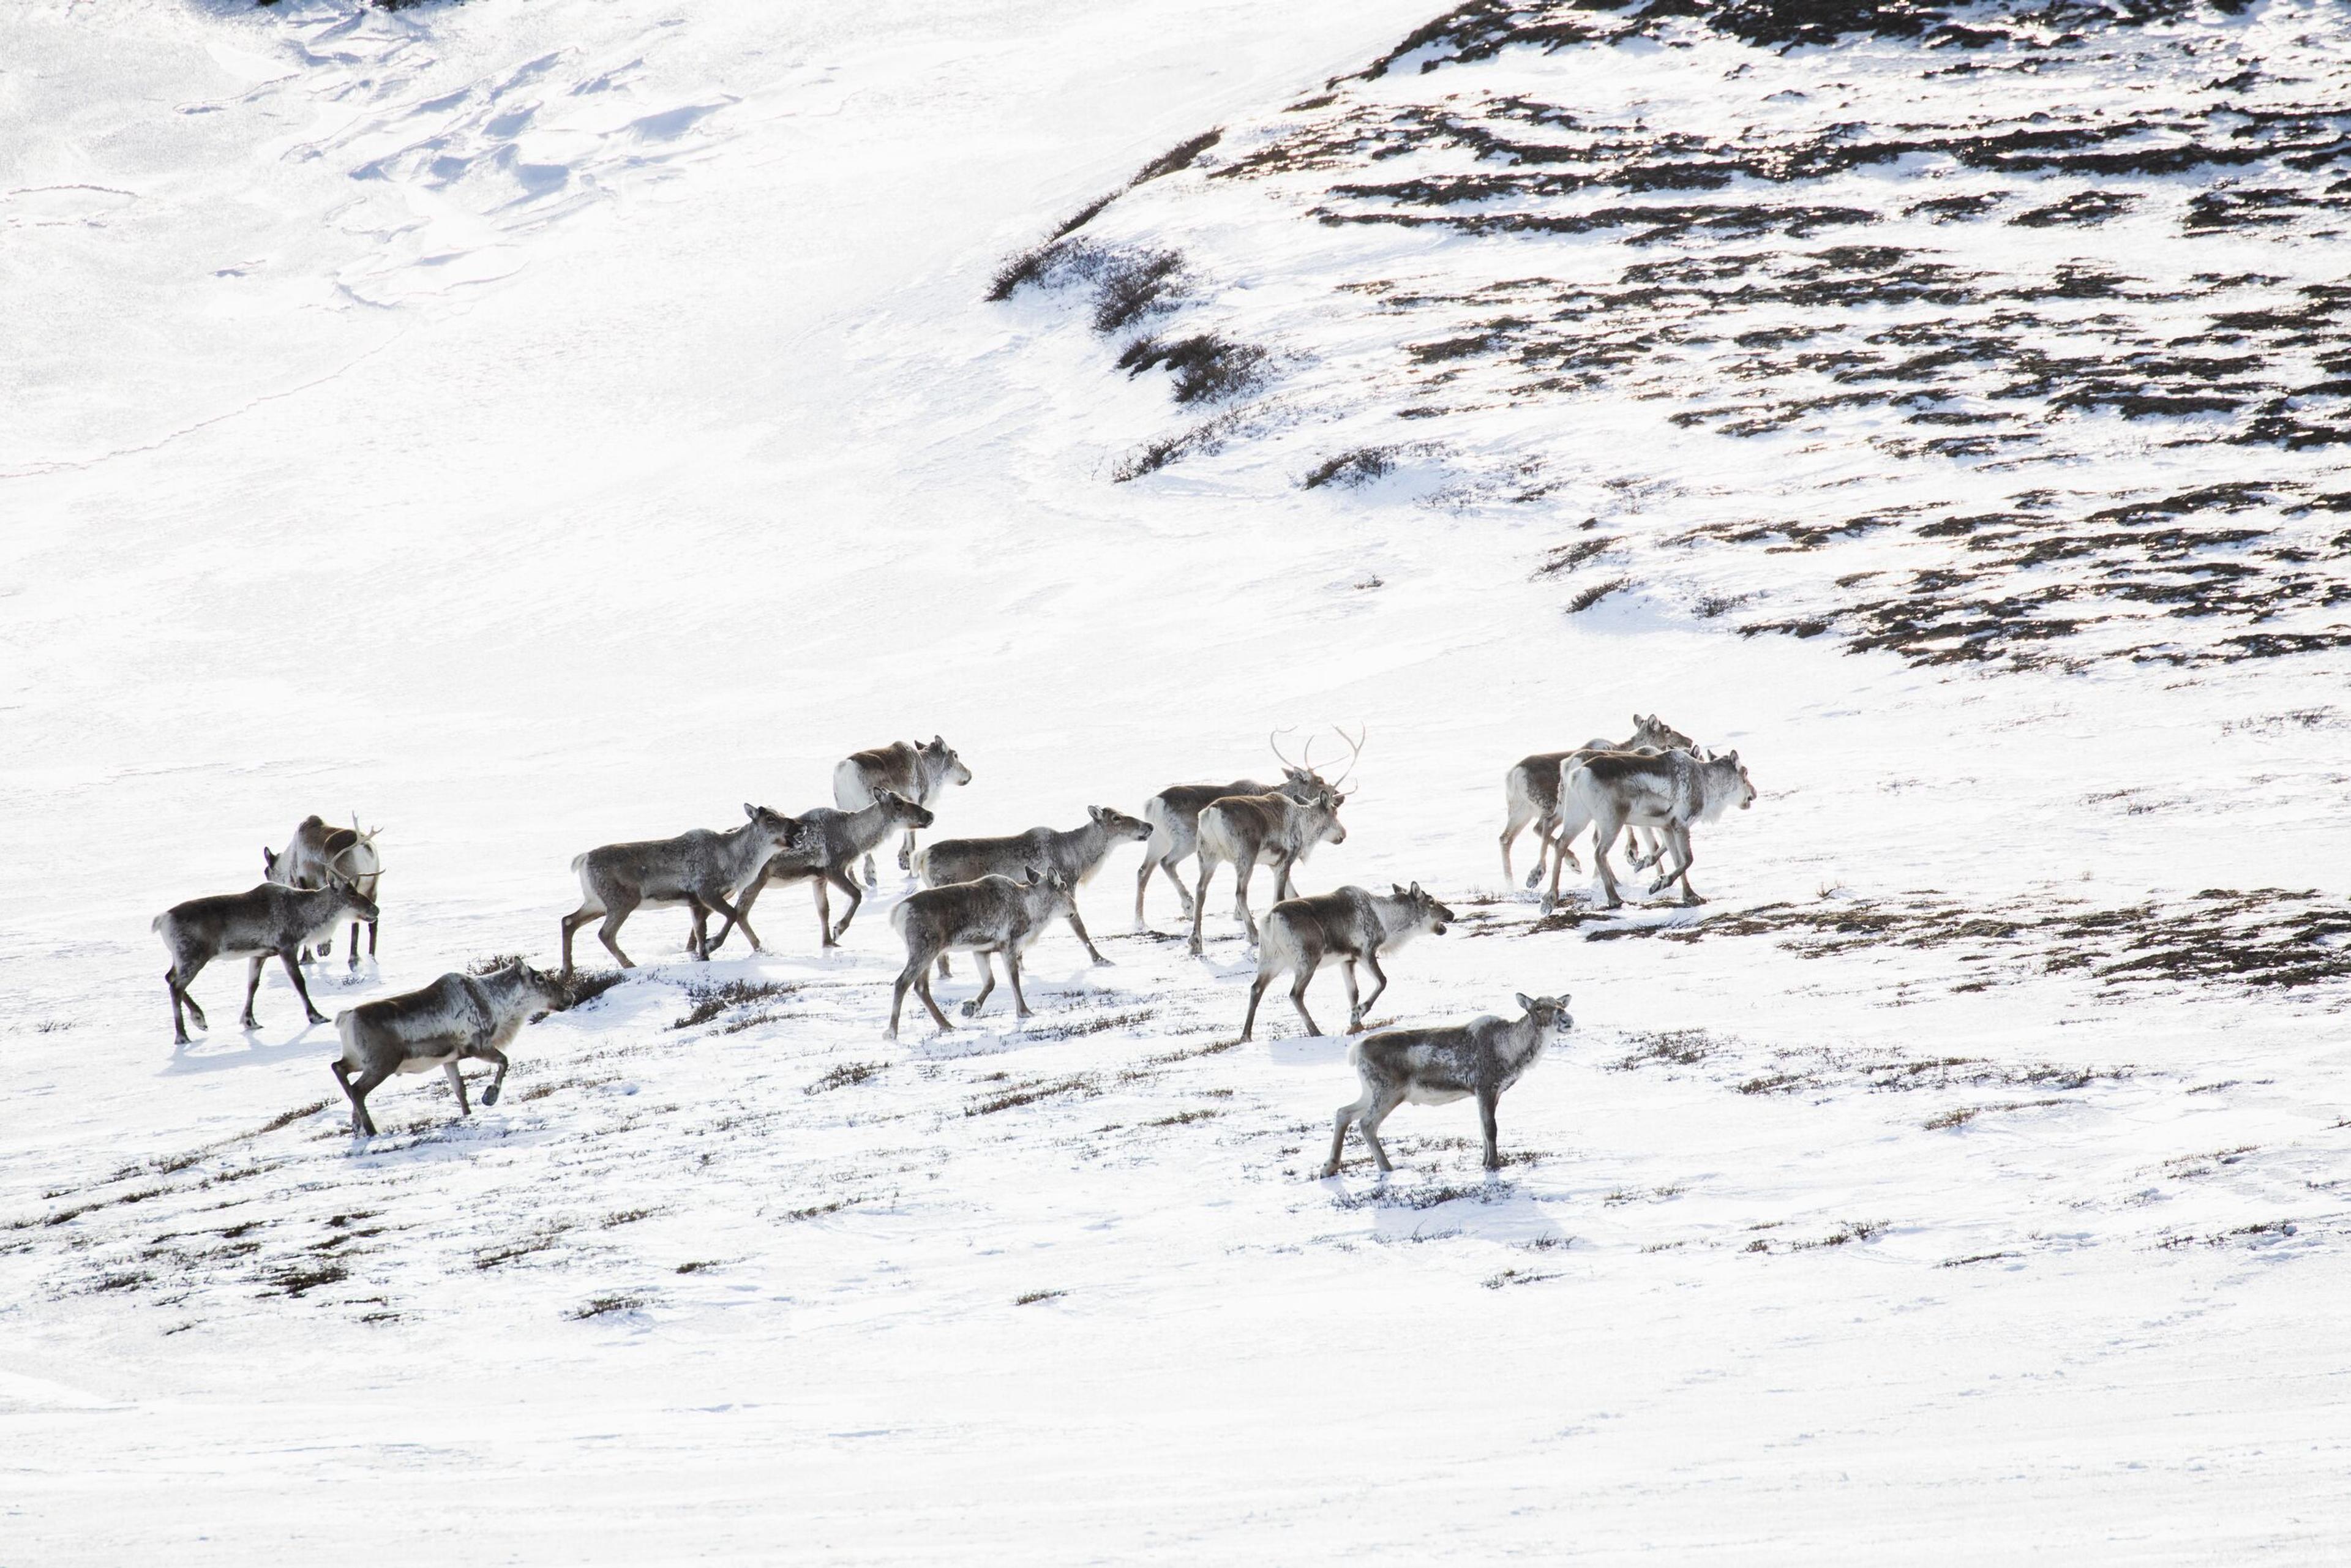 A herd of reindeer traversing a snowy hillside, their figures contrasting with the white, wintry landscape.